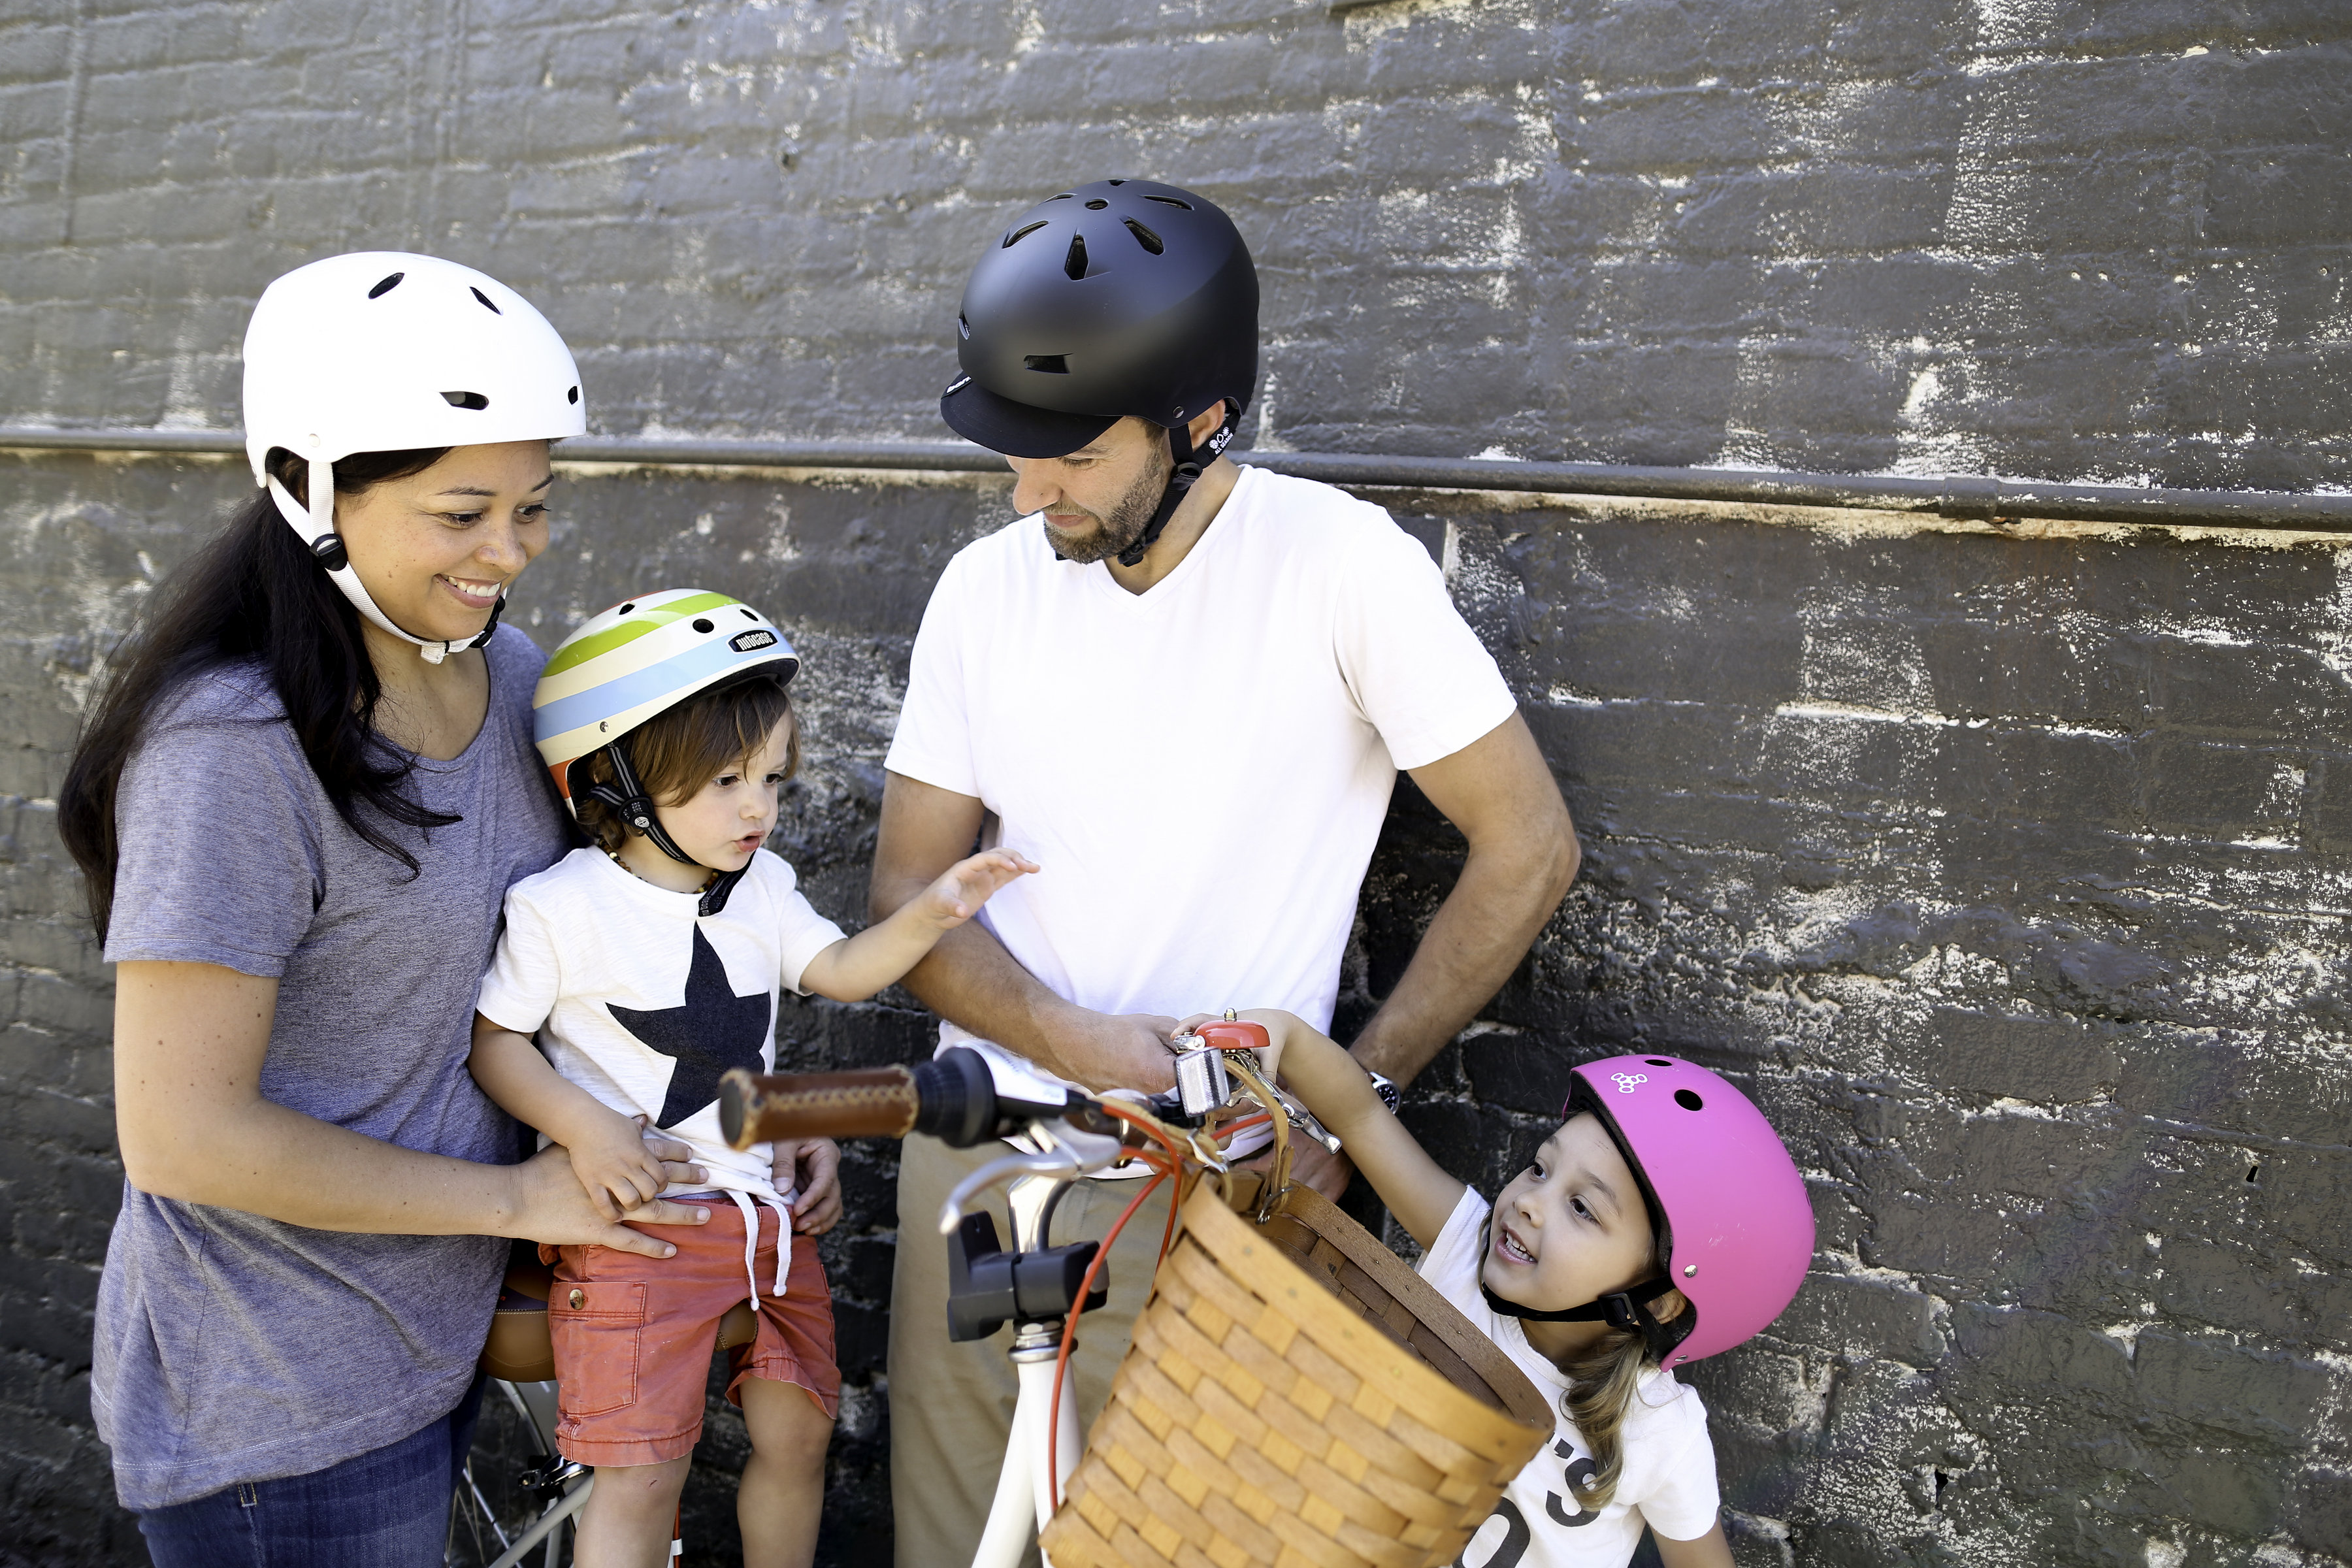 Our family outing bike ride in Oakland California with Public Bikes | Copy Cat Chic